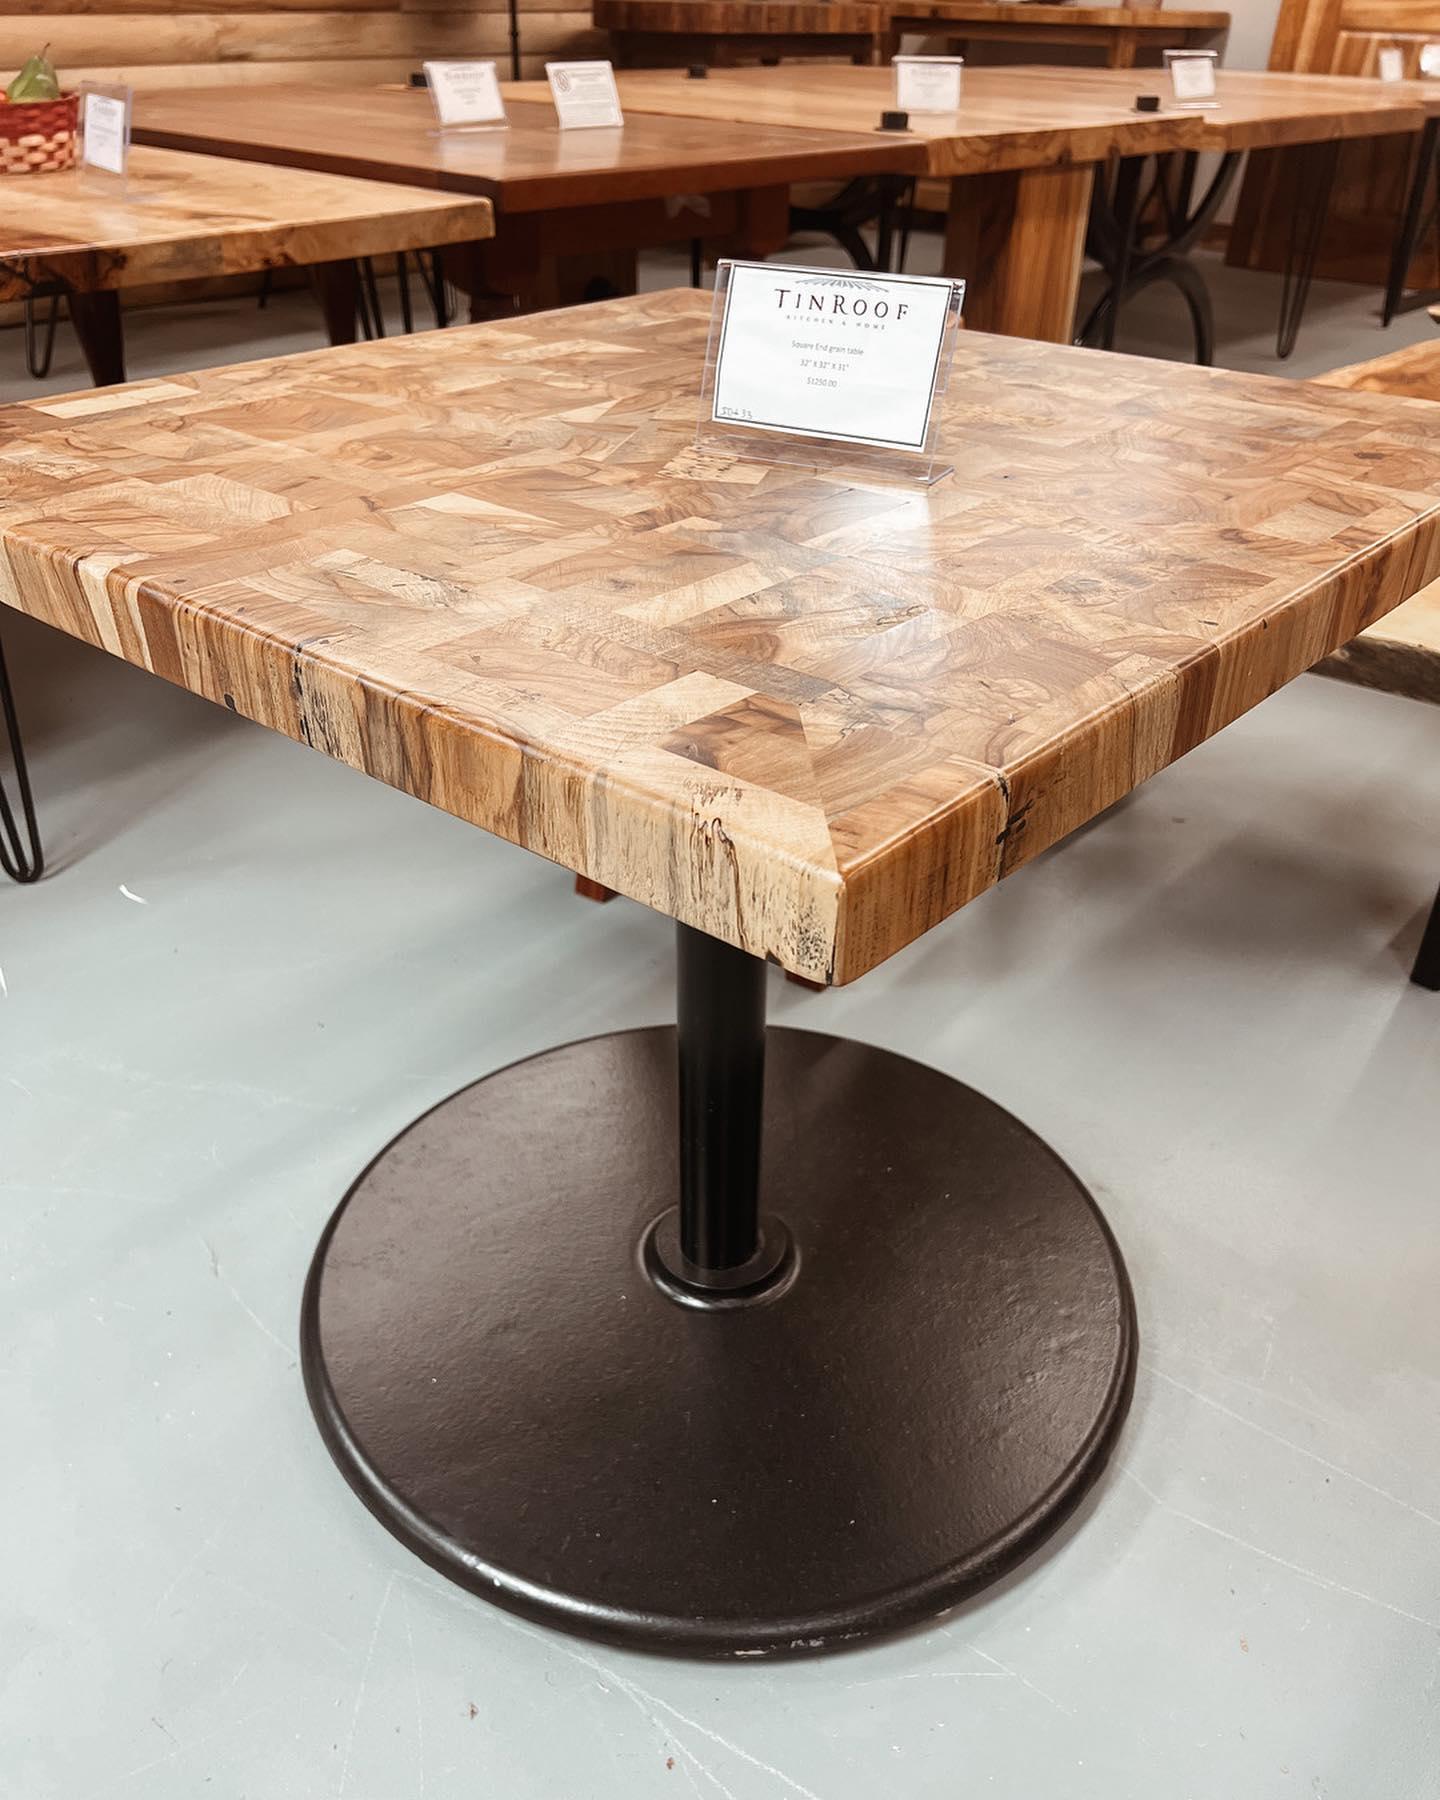 Square End Grain Table - Tin Roof Kitchen & Home